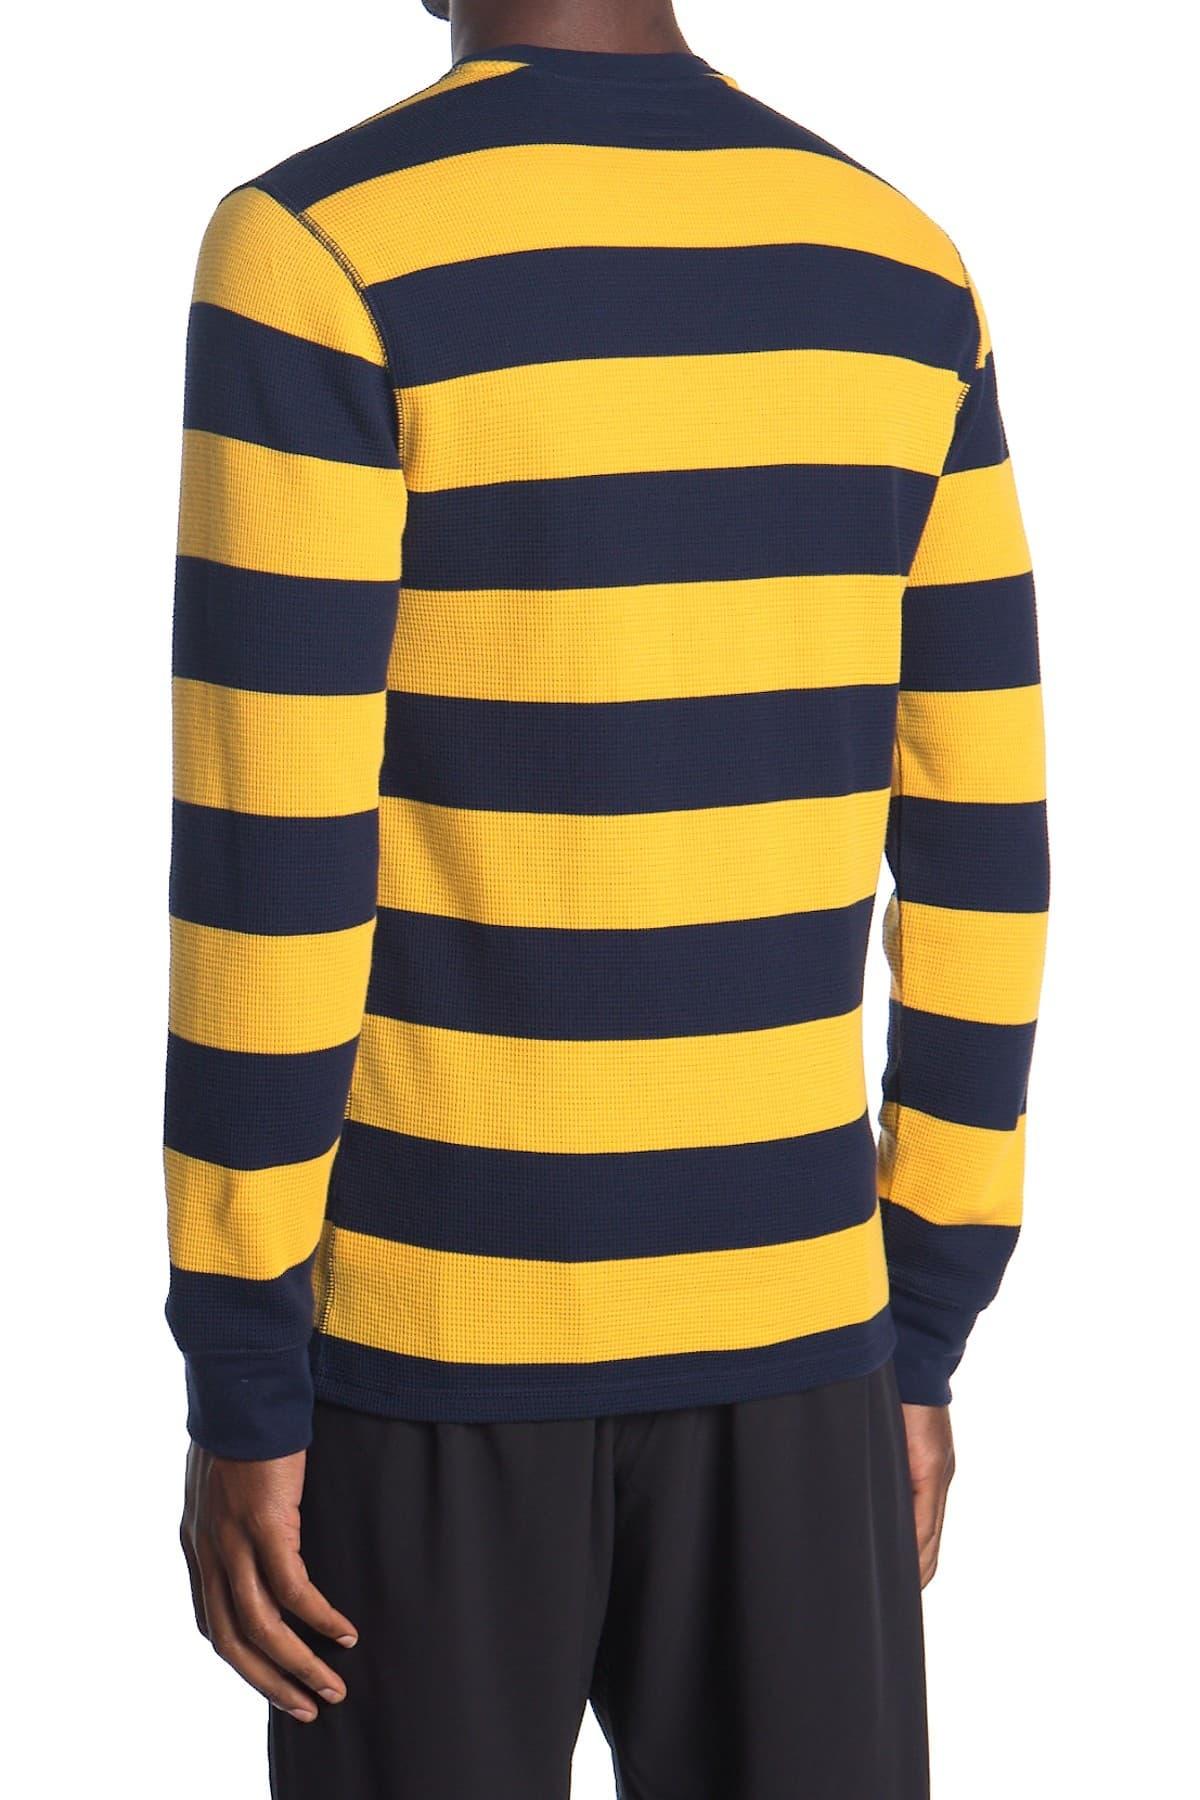 Polo Ralph Lauren Cotton Waffle Knit Rugby Stripe Sweater in Yellow for